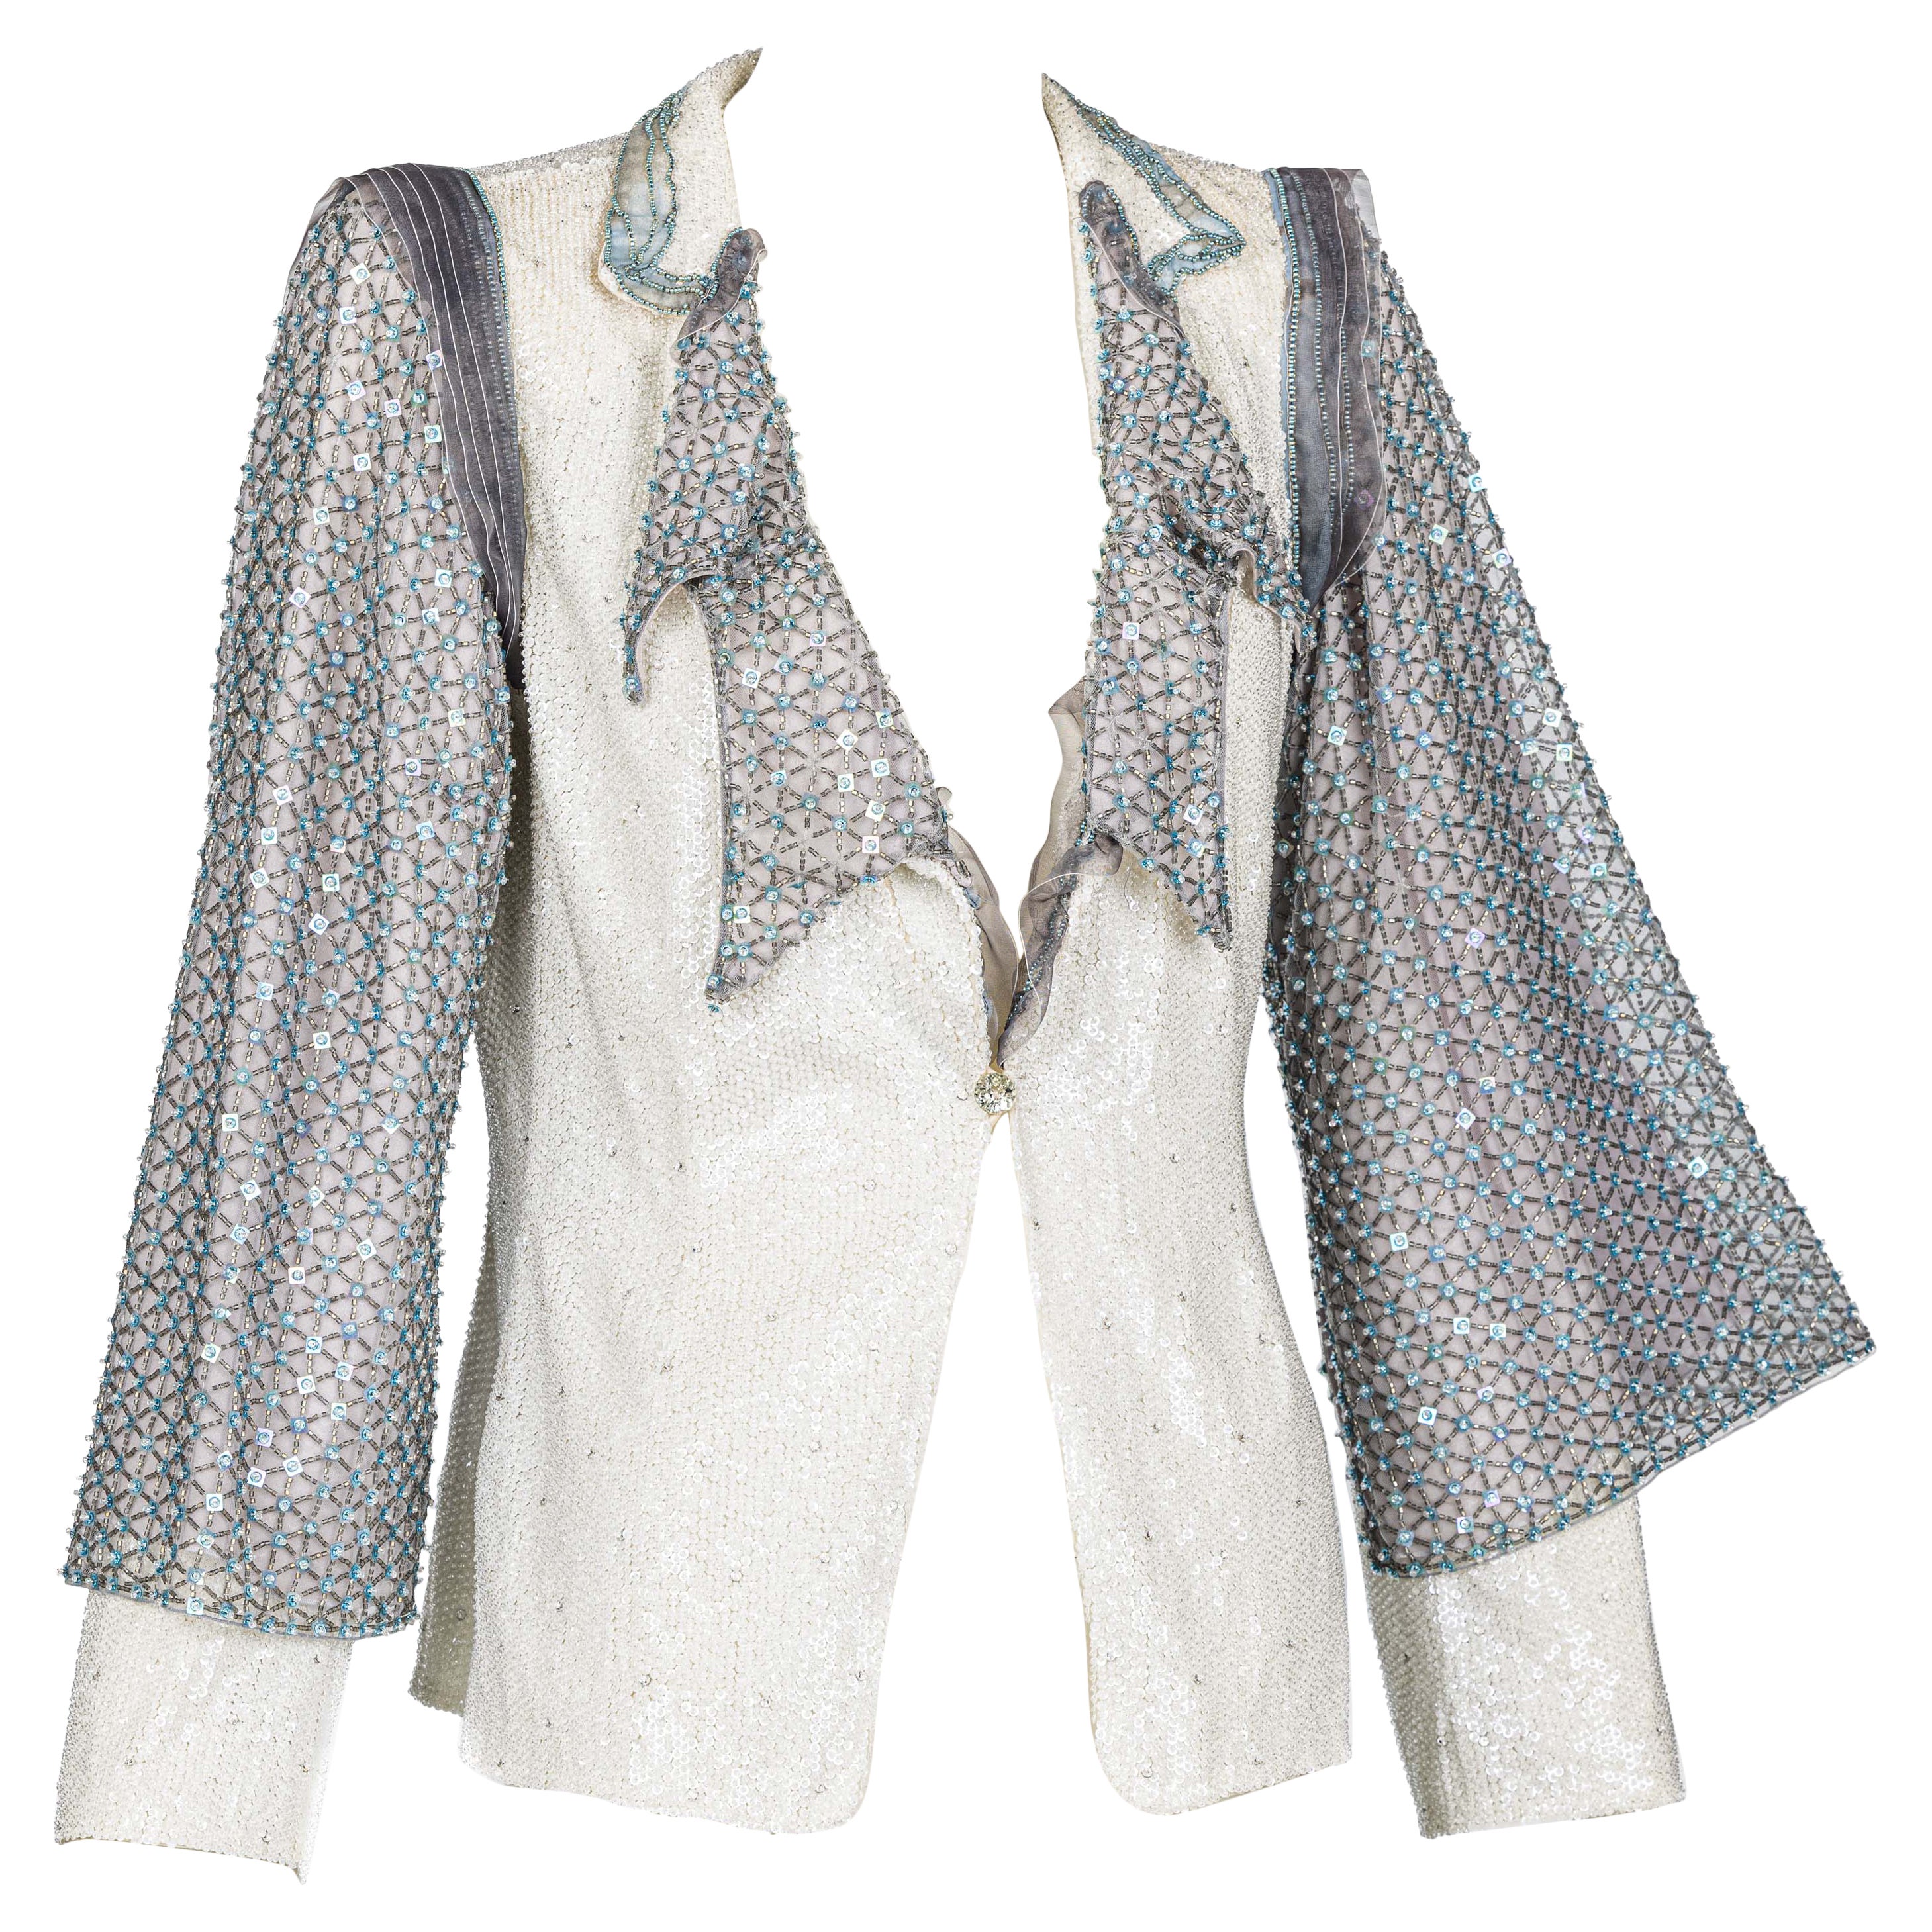 An exceptional Giorgio Armani jacket that was purchased for over $12k.
Completely embellished with sequins and crystals, intricate details with organza layers, and layered beaded sleeves. An absolute showstopper.
The jacket is lined and closes with